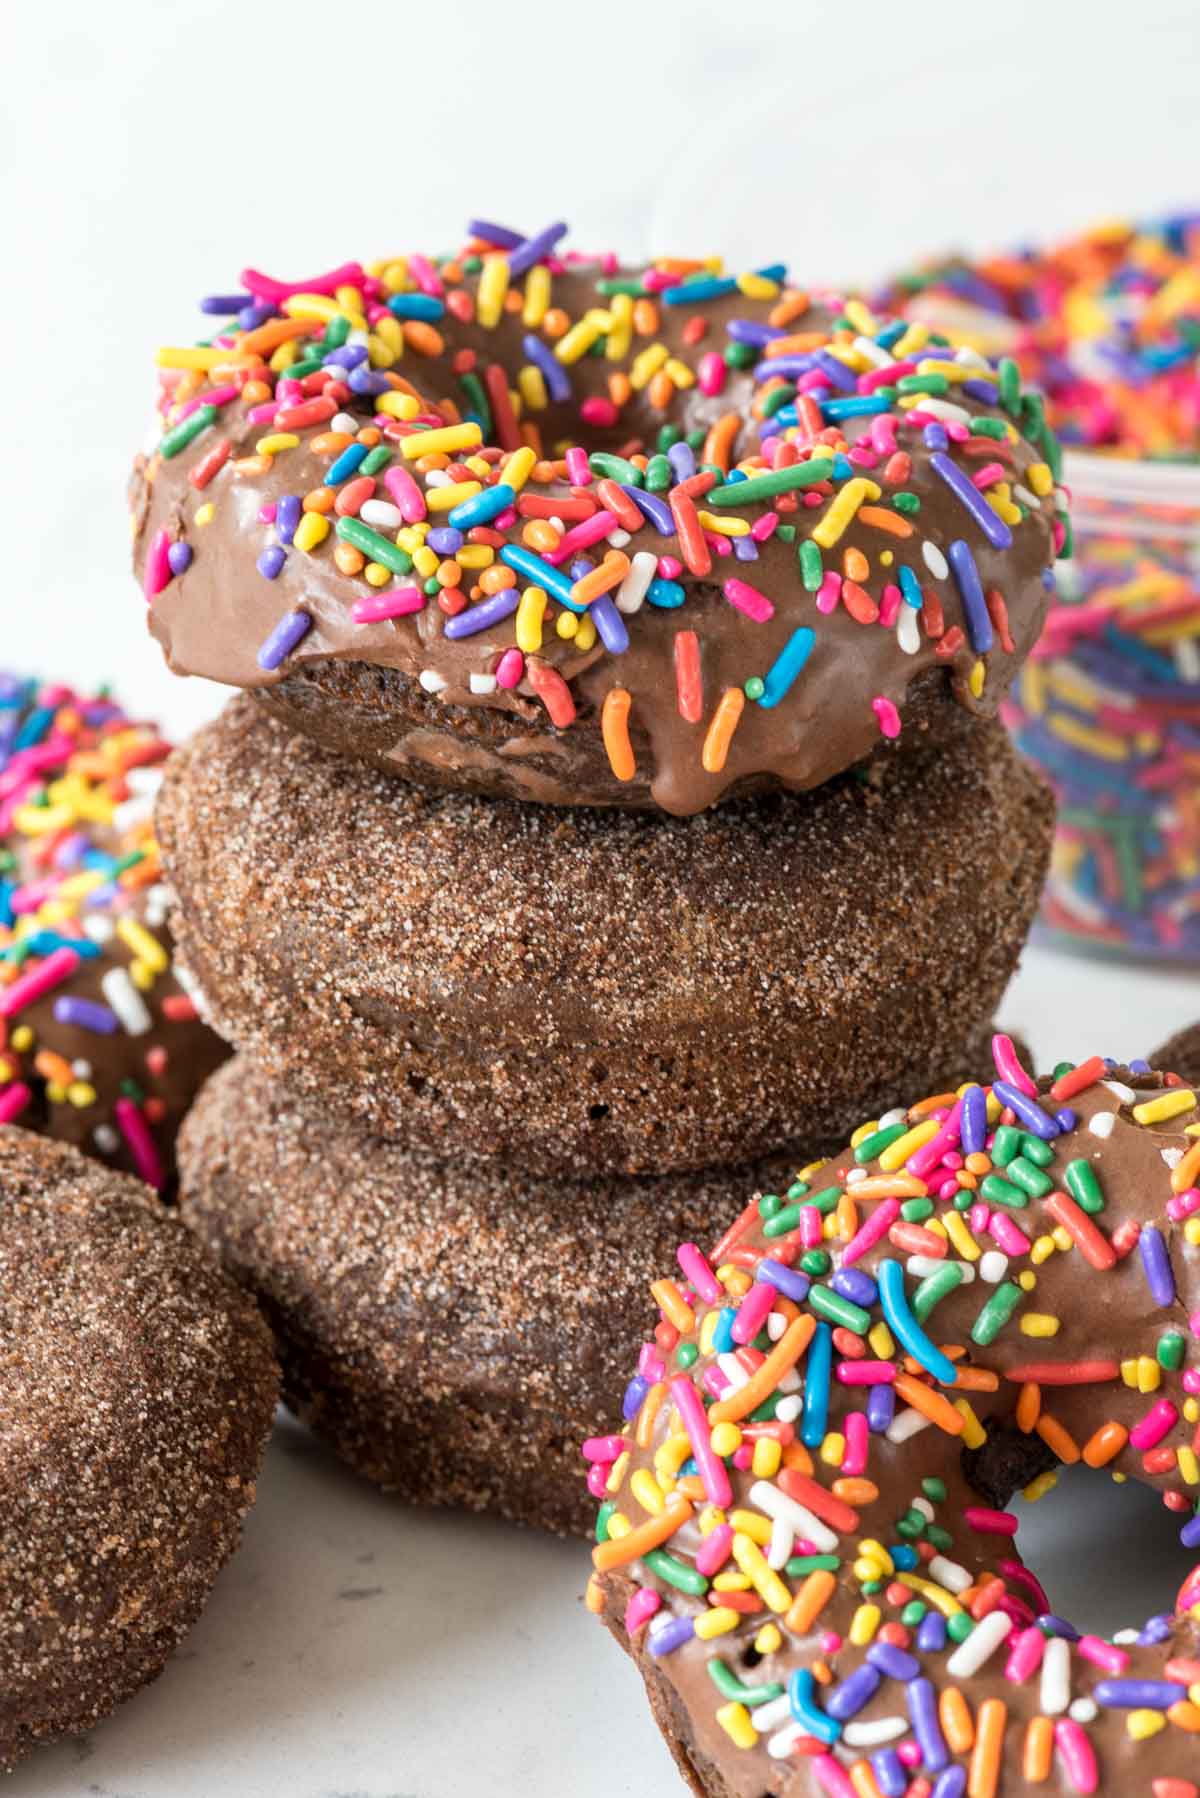 Baked Chocolate Donuts - this recipe is the perfect donut recipe! It's light and fluffy and they're served up glazed or cinnamon sugar churro style!